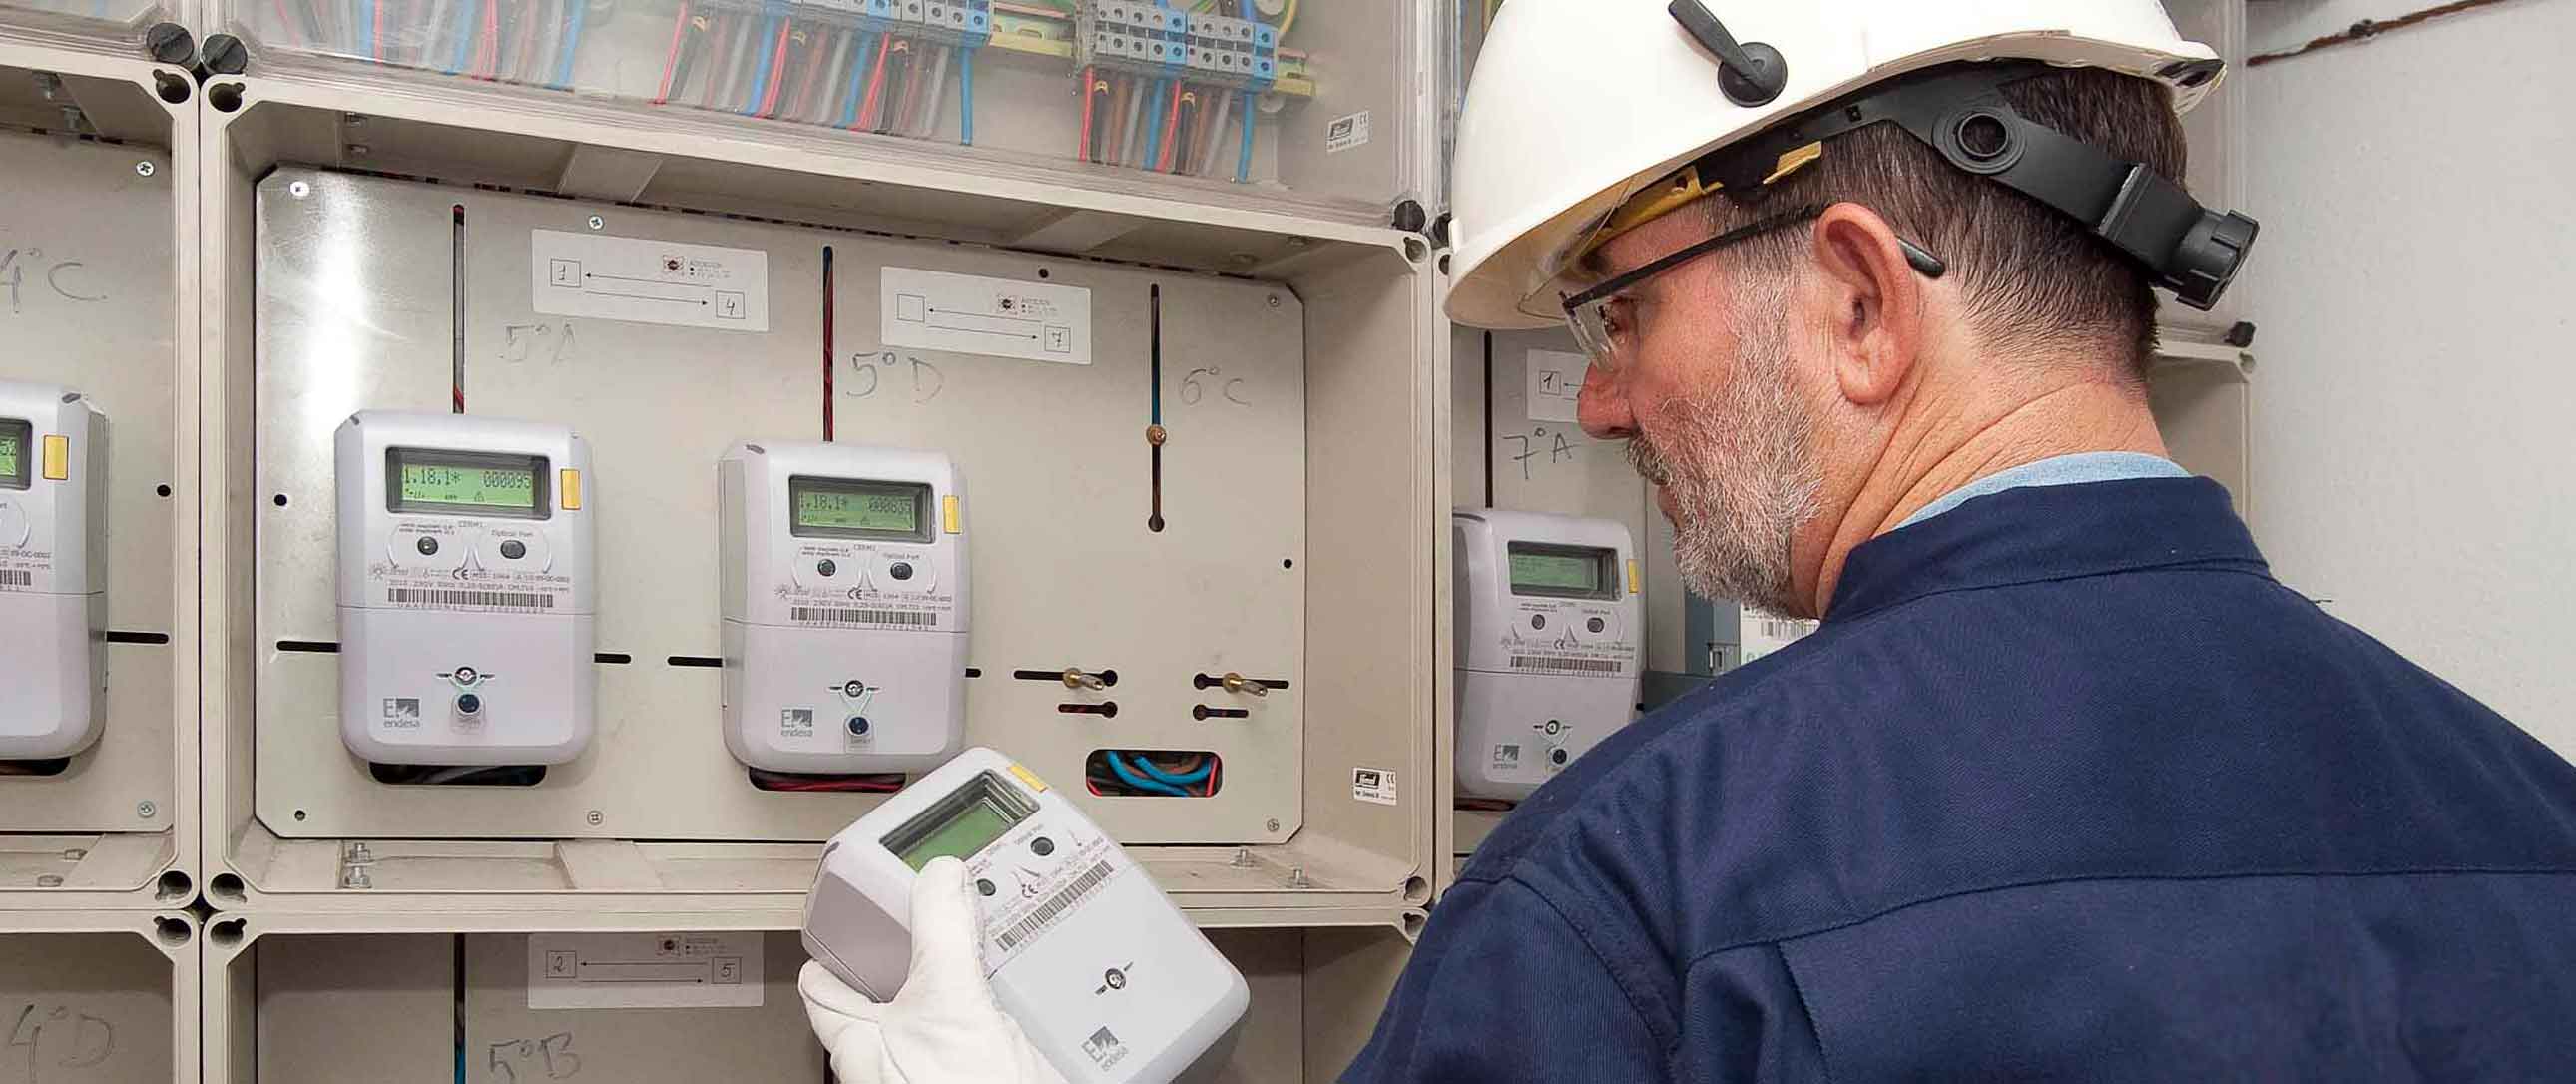 Installer in front of a central metering station with smart metering equipment in his hand